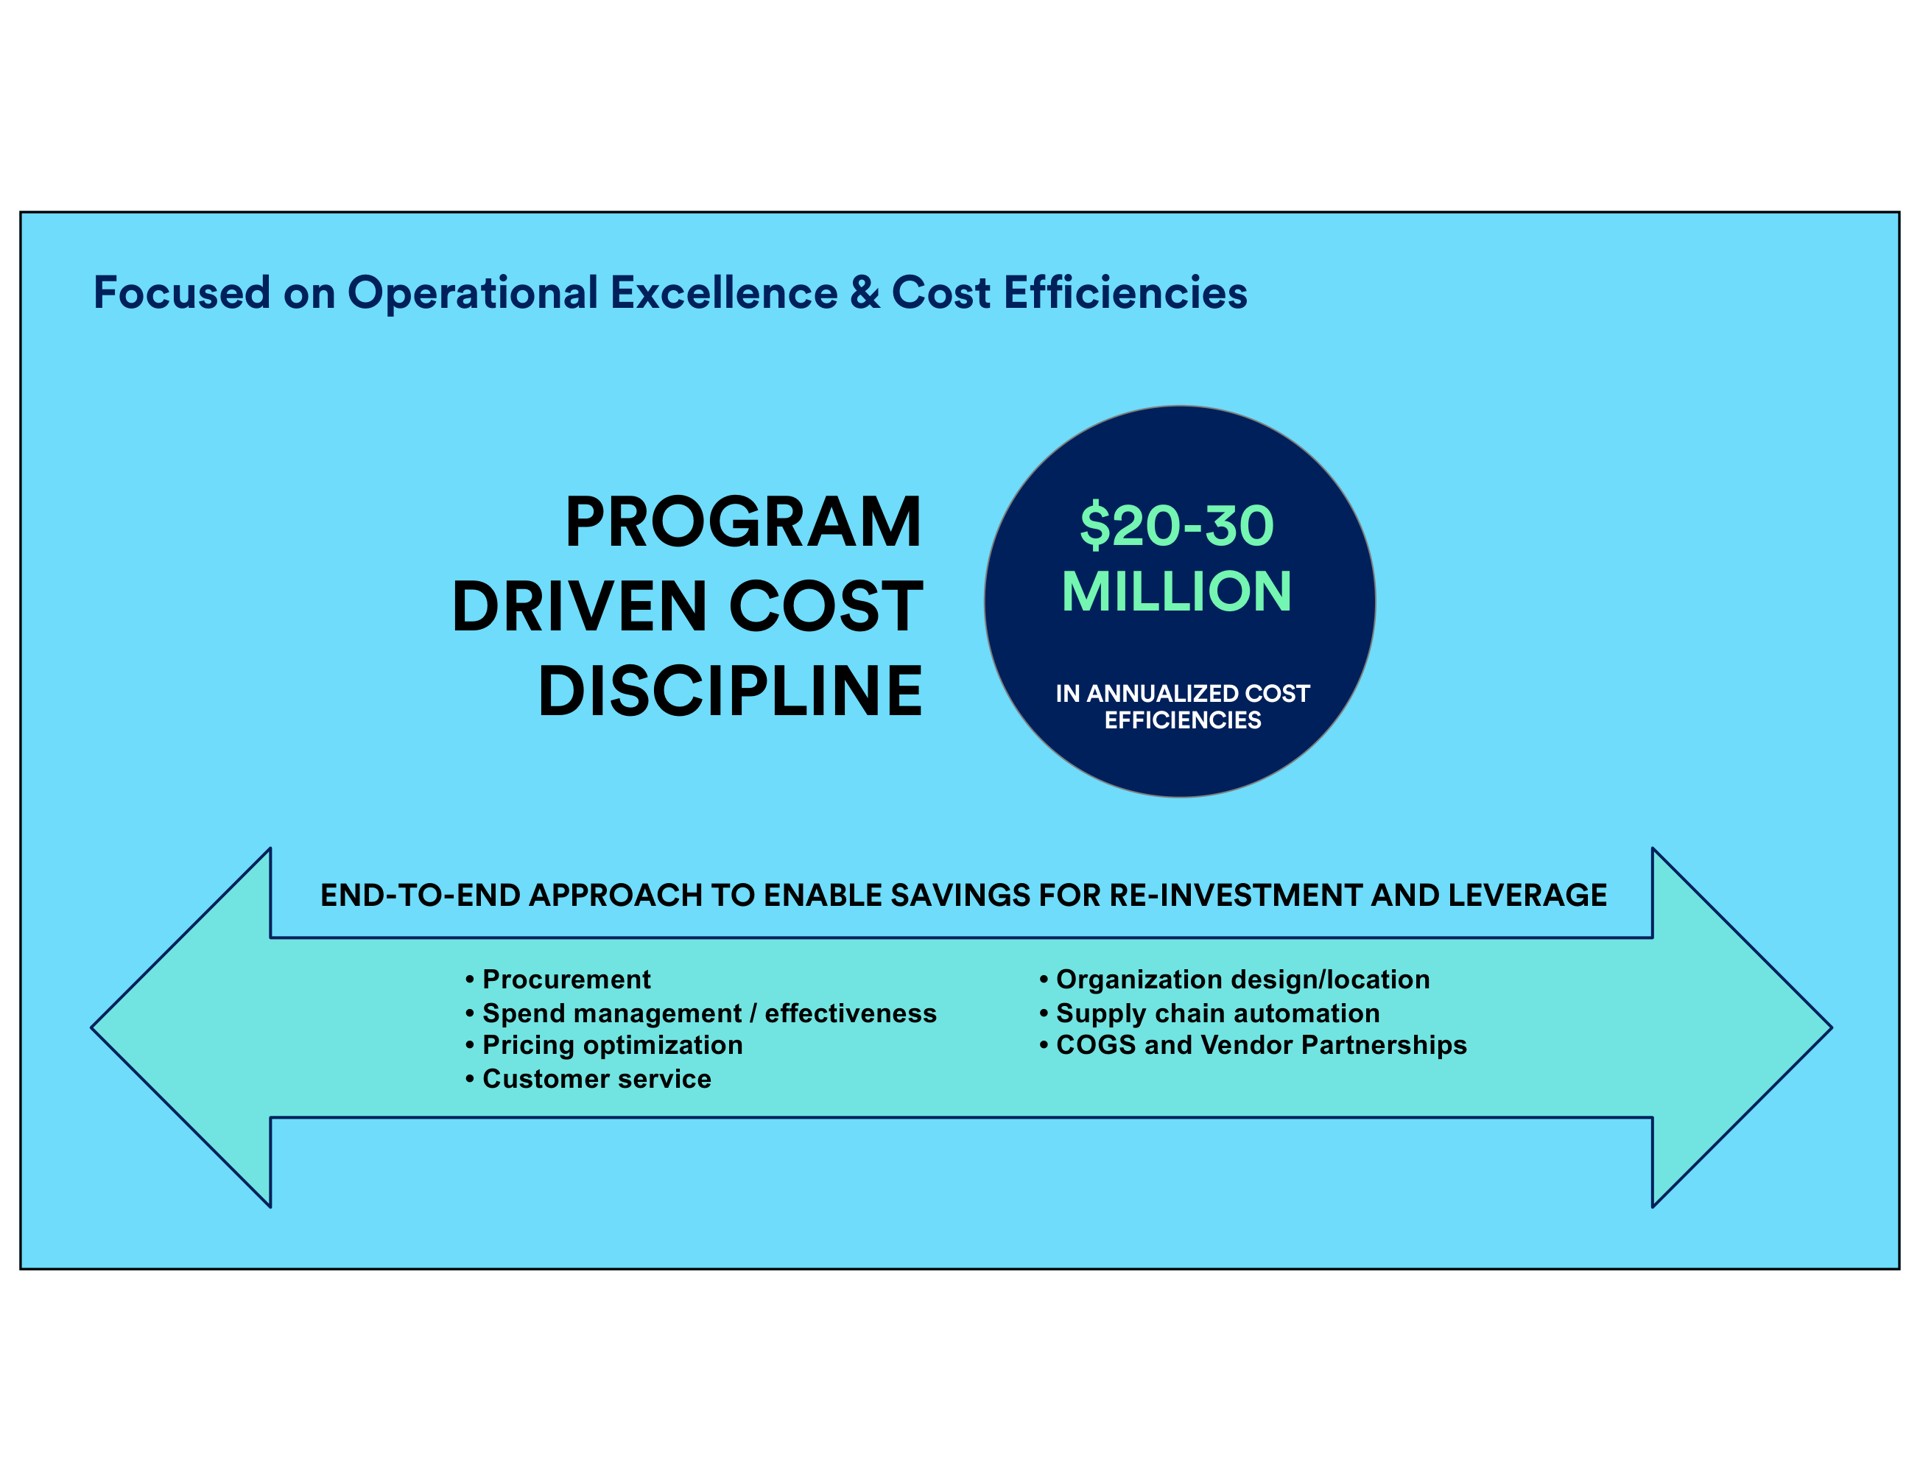 focused on operational excellence cost efficiencies program driven cost discipline million end to end approach to enable savings for investment and leverage customer service procurement spend management effectiveness pricing optimization organization design location supply chain cogs and vendor partnerships | Petco